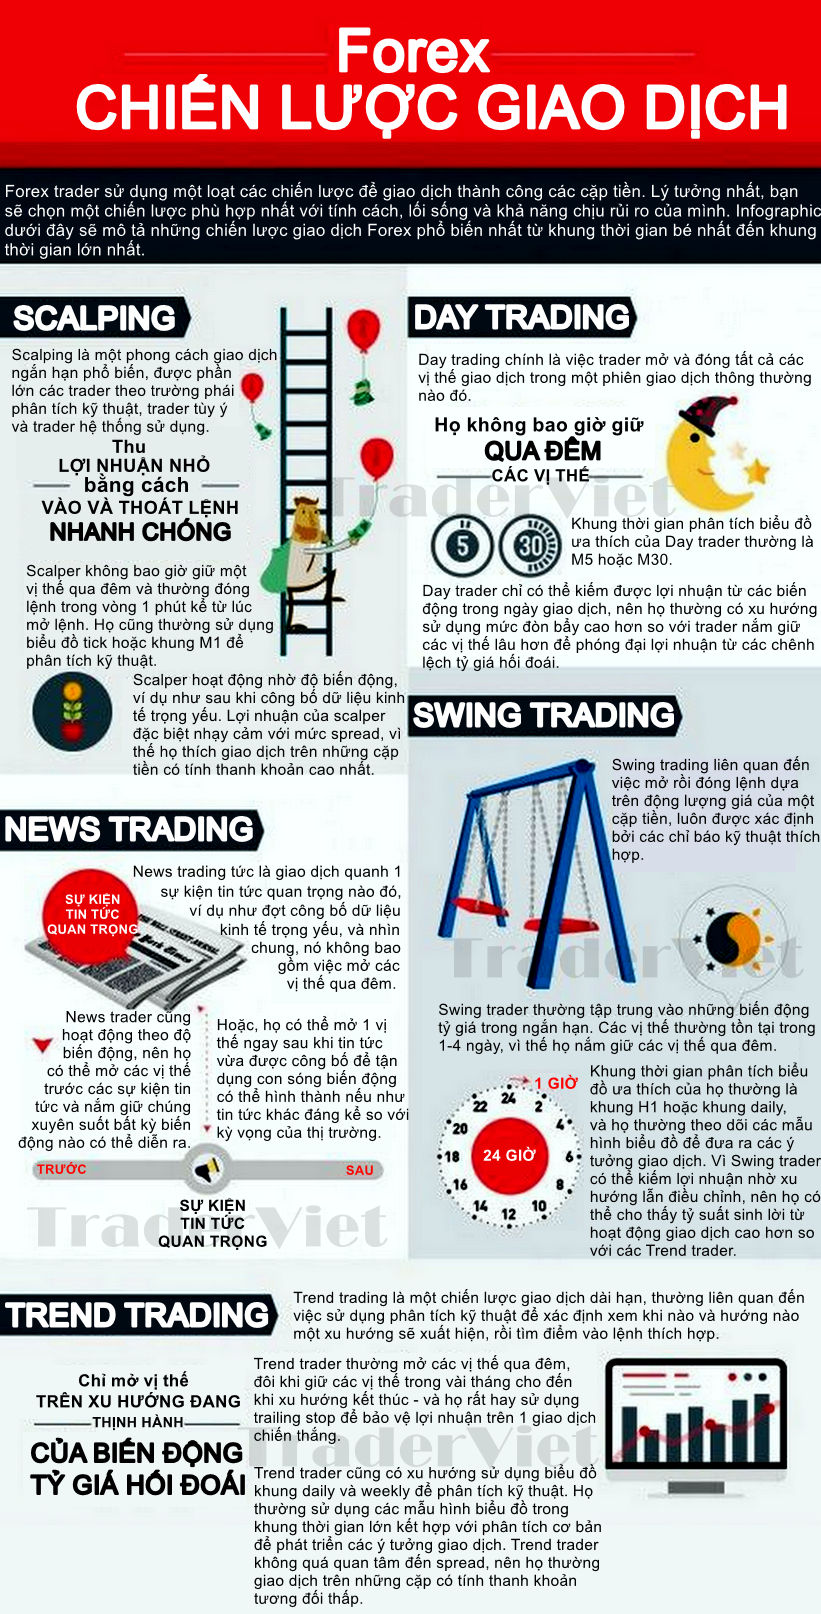 INFOGRAPHIC-Cac-kieu-chien-luoc-pho-bien-trong-giao-dich-Forex-TraderViet.jpg